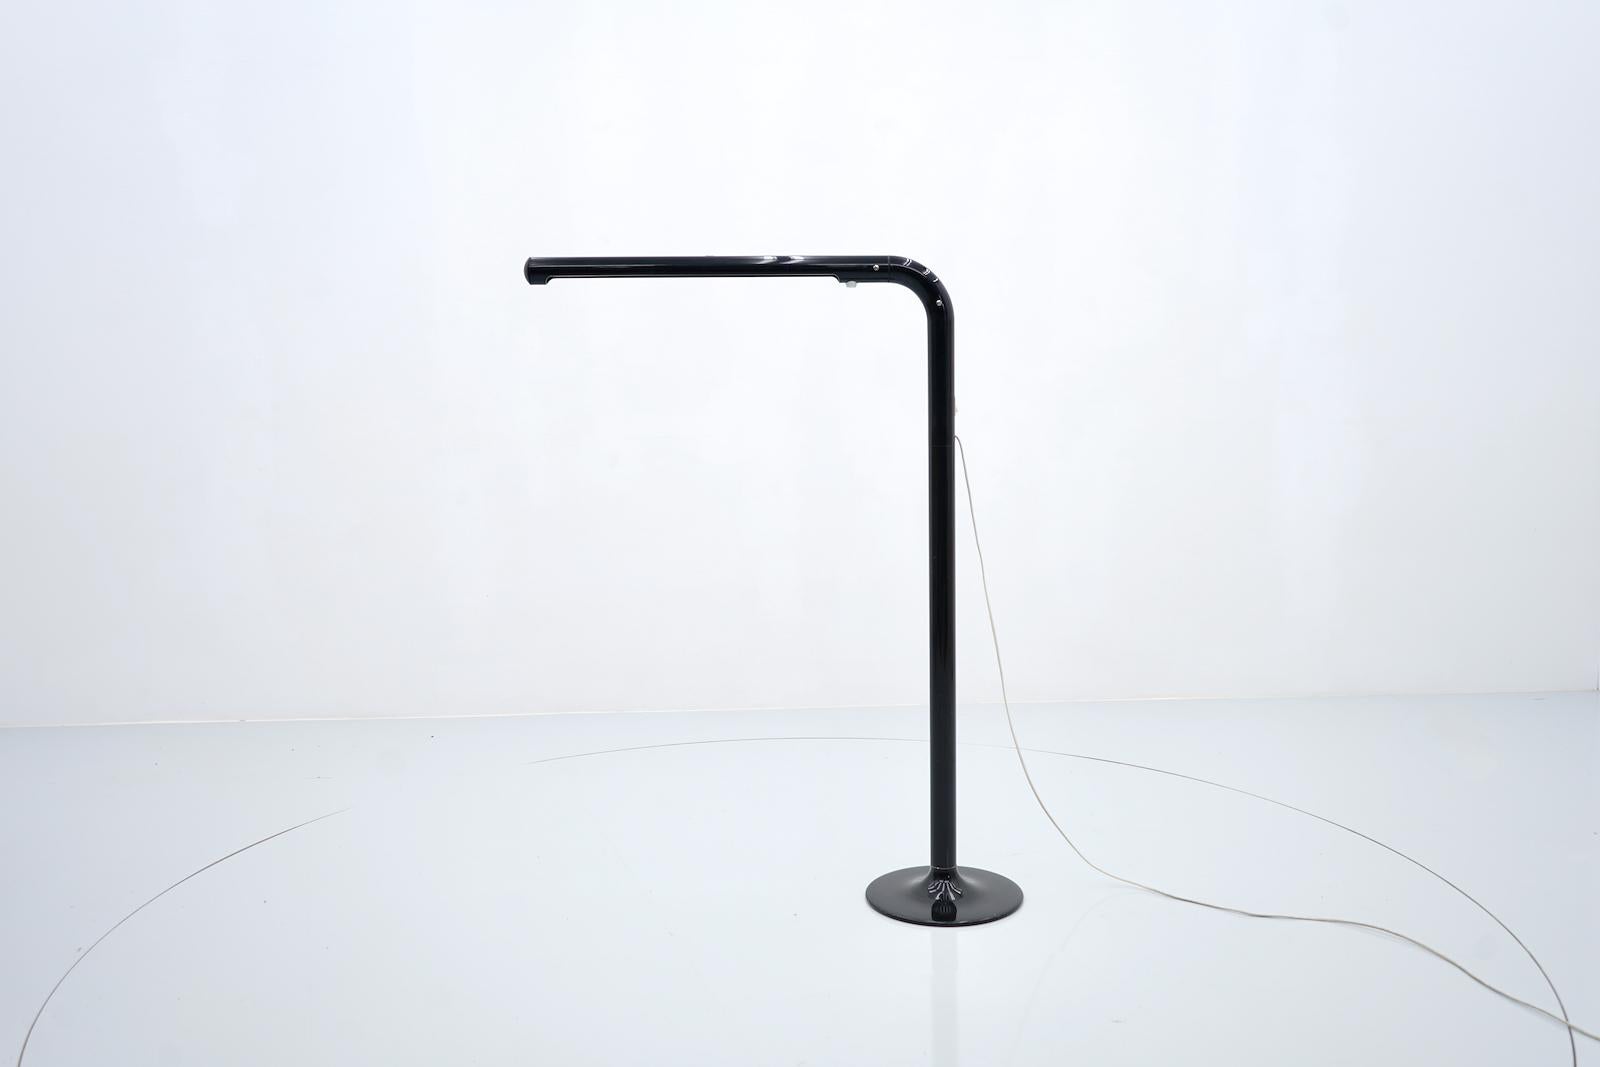 Rare floor lamp by Anders Pehrson for Ateljé Lyktan 1970s
Good condition.

 
Details:

Creator: Anders Pehrson (Designer) Ateljé Lyktan (Maker)
Period: 1970s
Color: brown
Style: Mid-Century Modern
Place of Origin: Sweden
Dimensions: